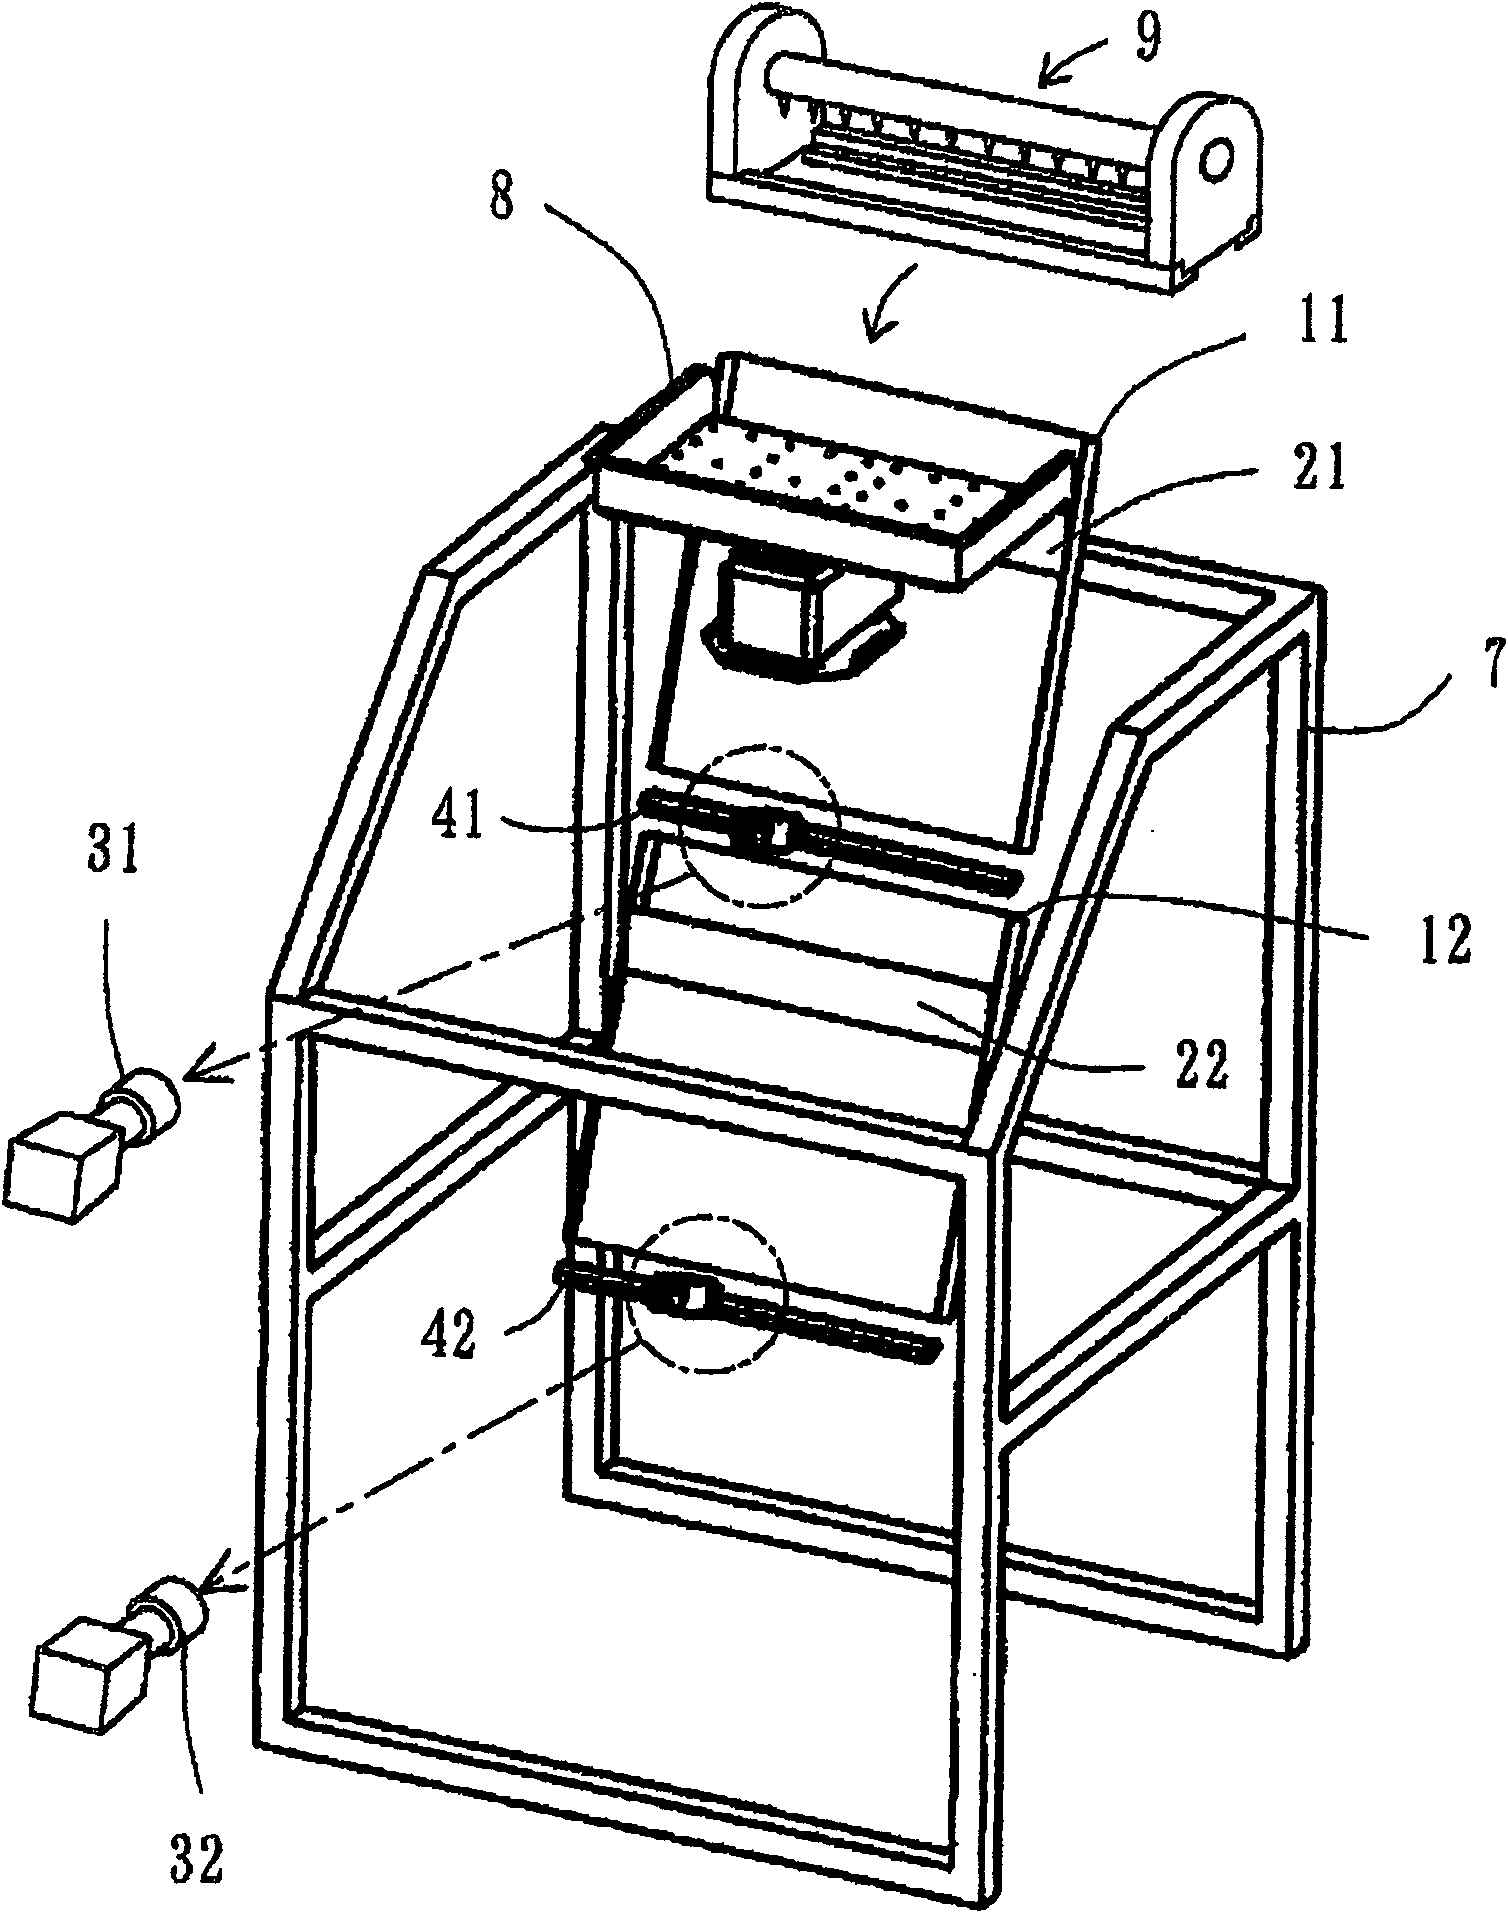 Apparatus for sorting according to colour